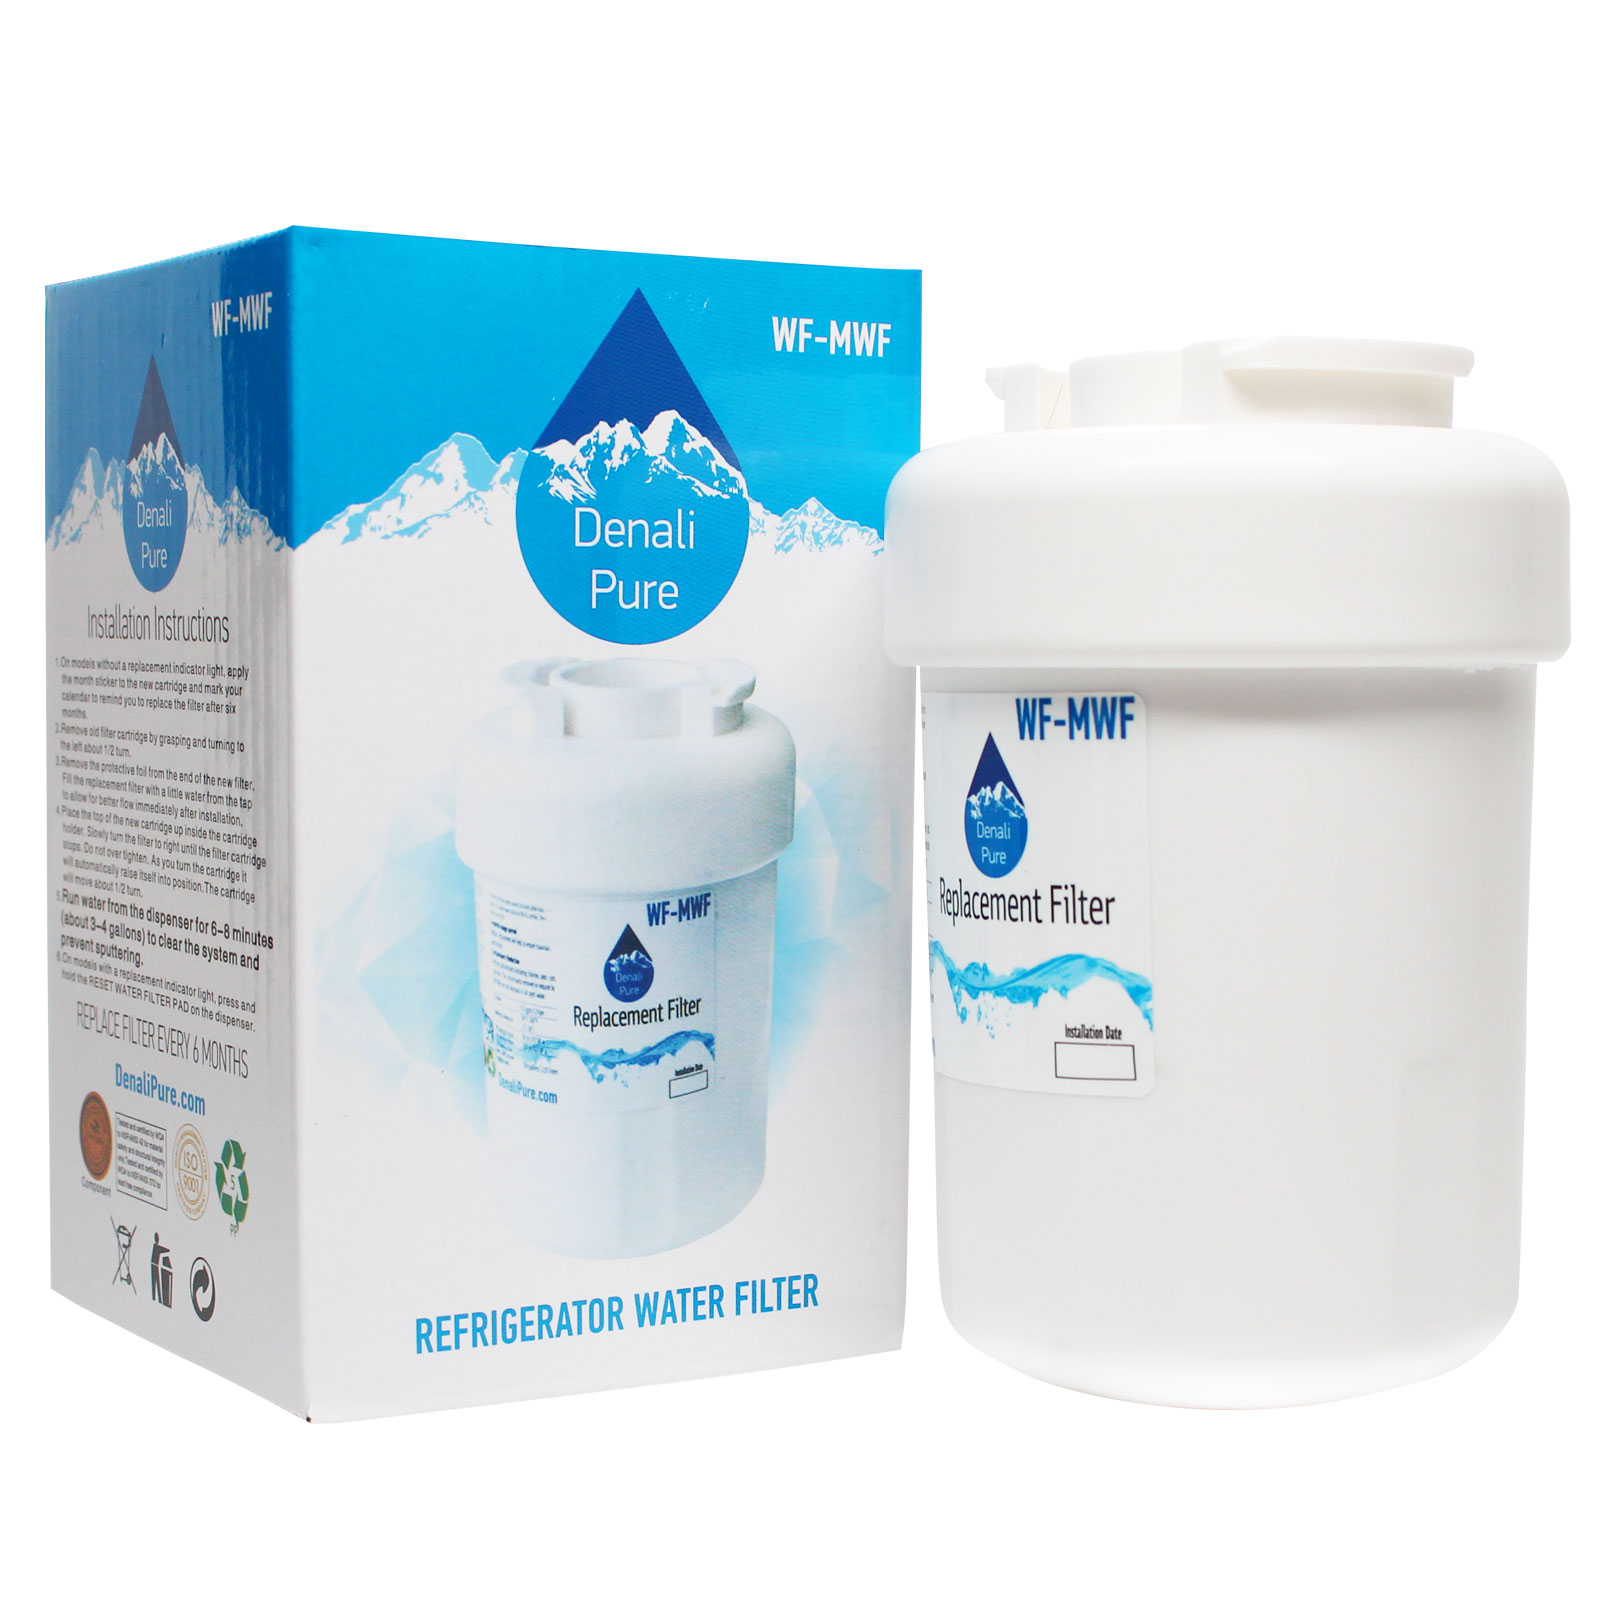 Denali Pure Replacement General Electric GSS25QSWASS Refrigerator Water Filter - For General Electric MWF, MWFP Water Filter Cartridge